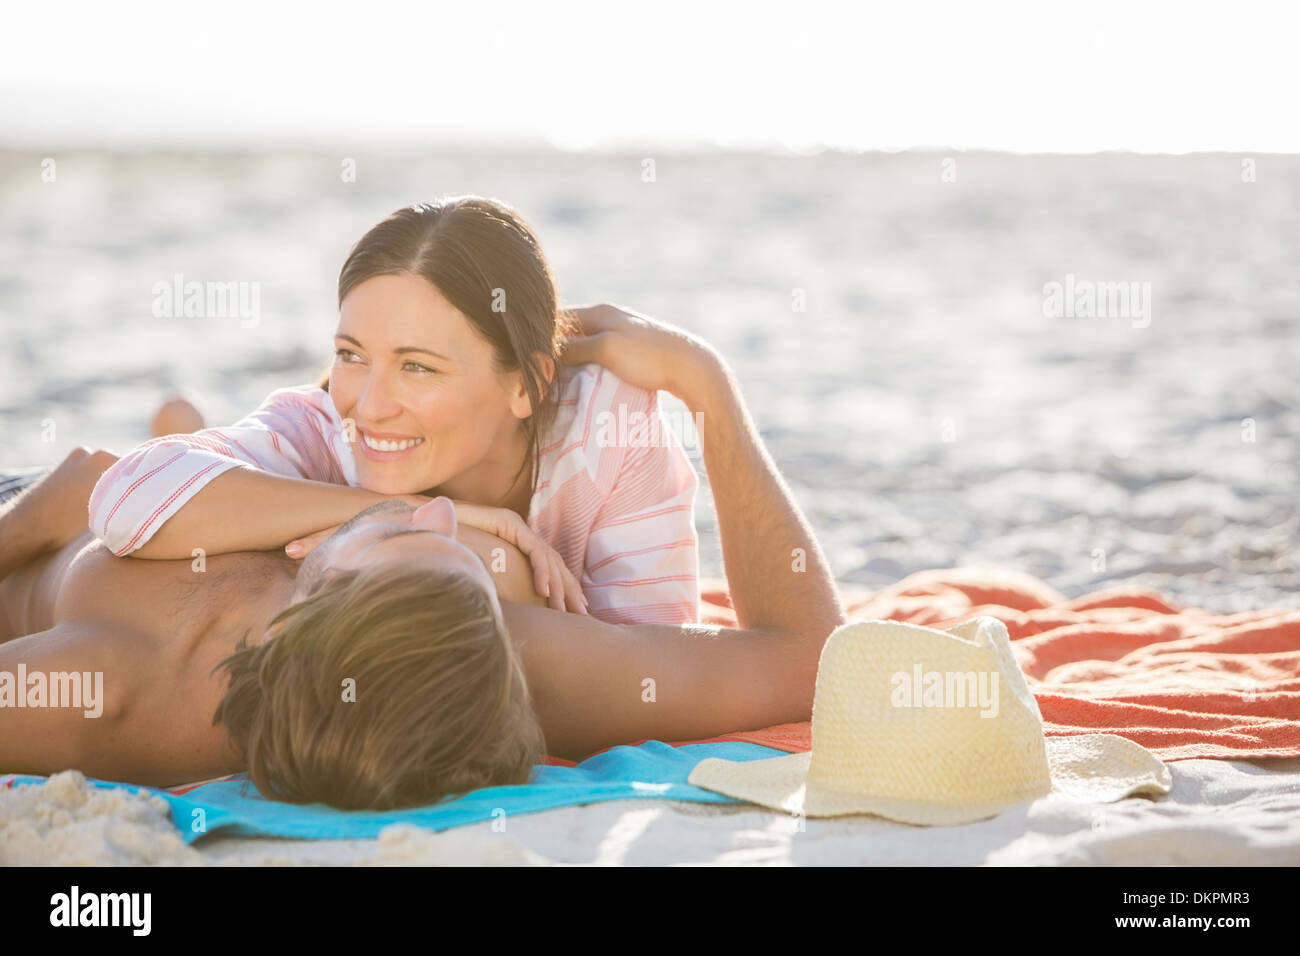 Couple relaxing on beach Banque D'Images